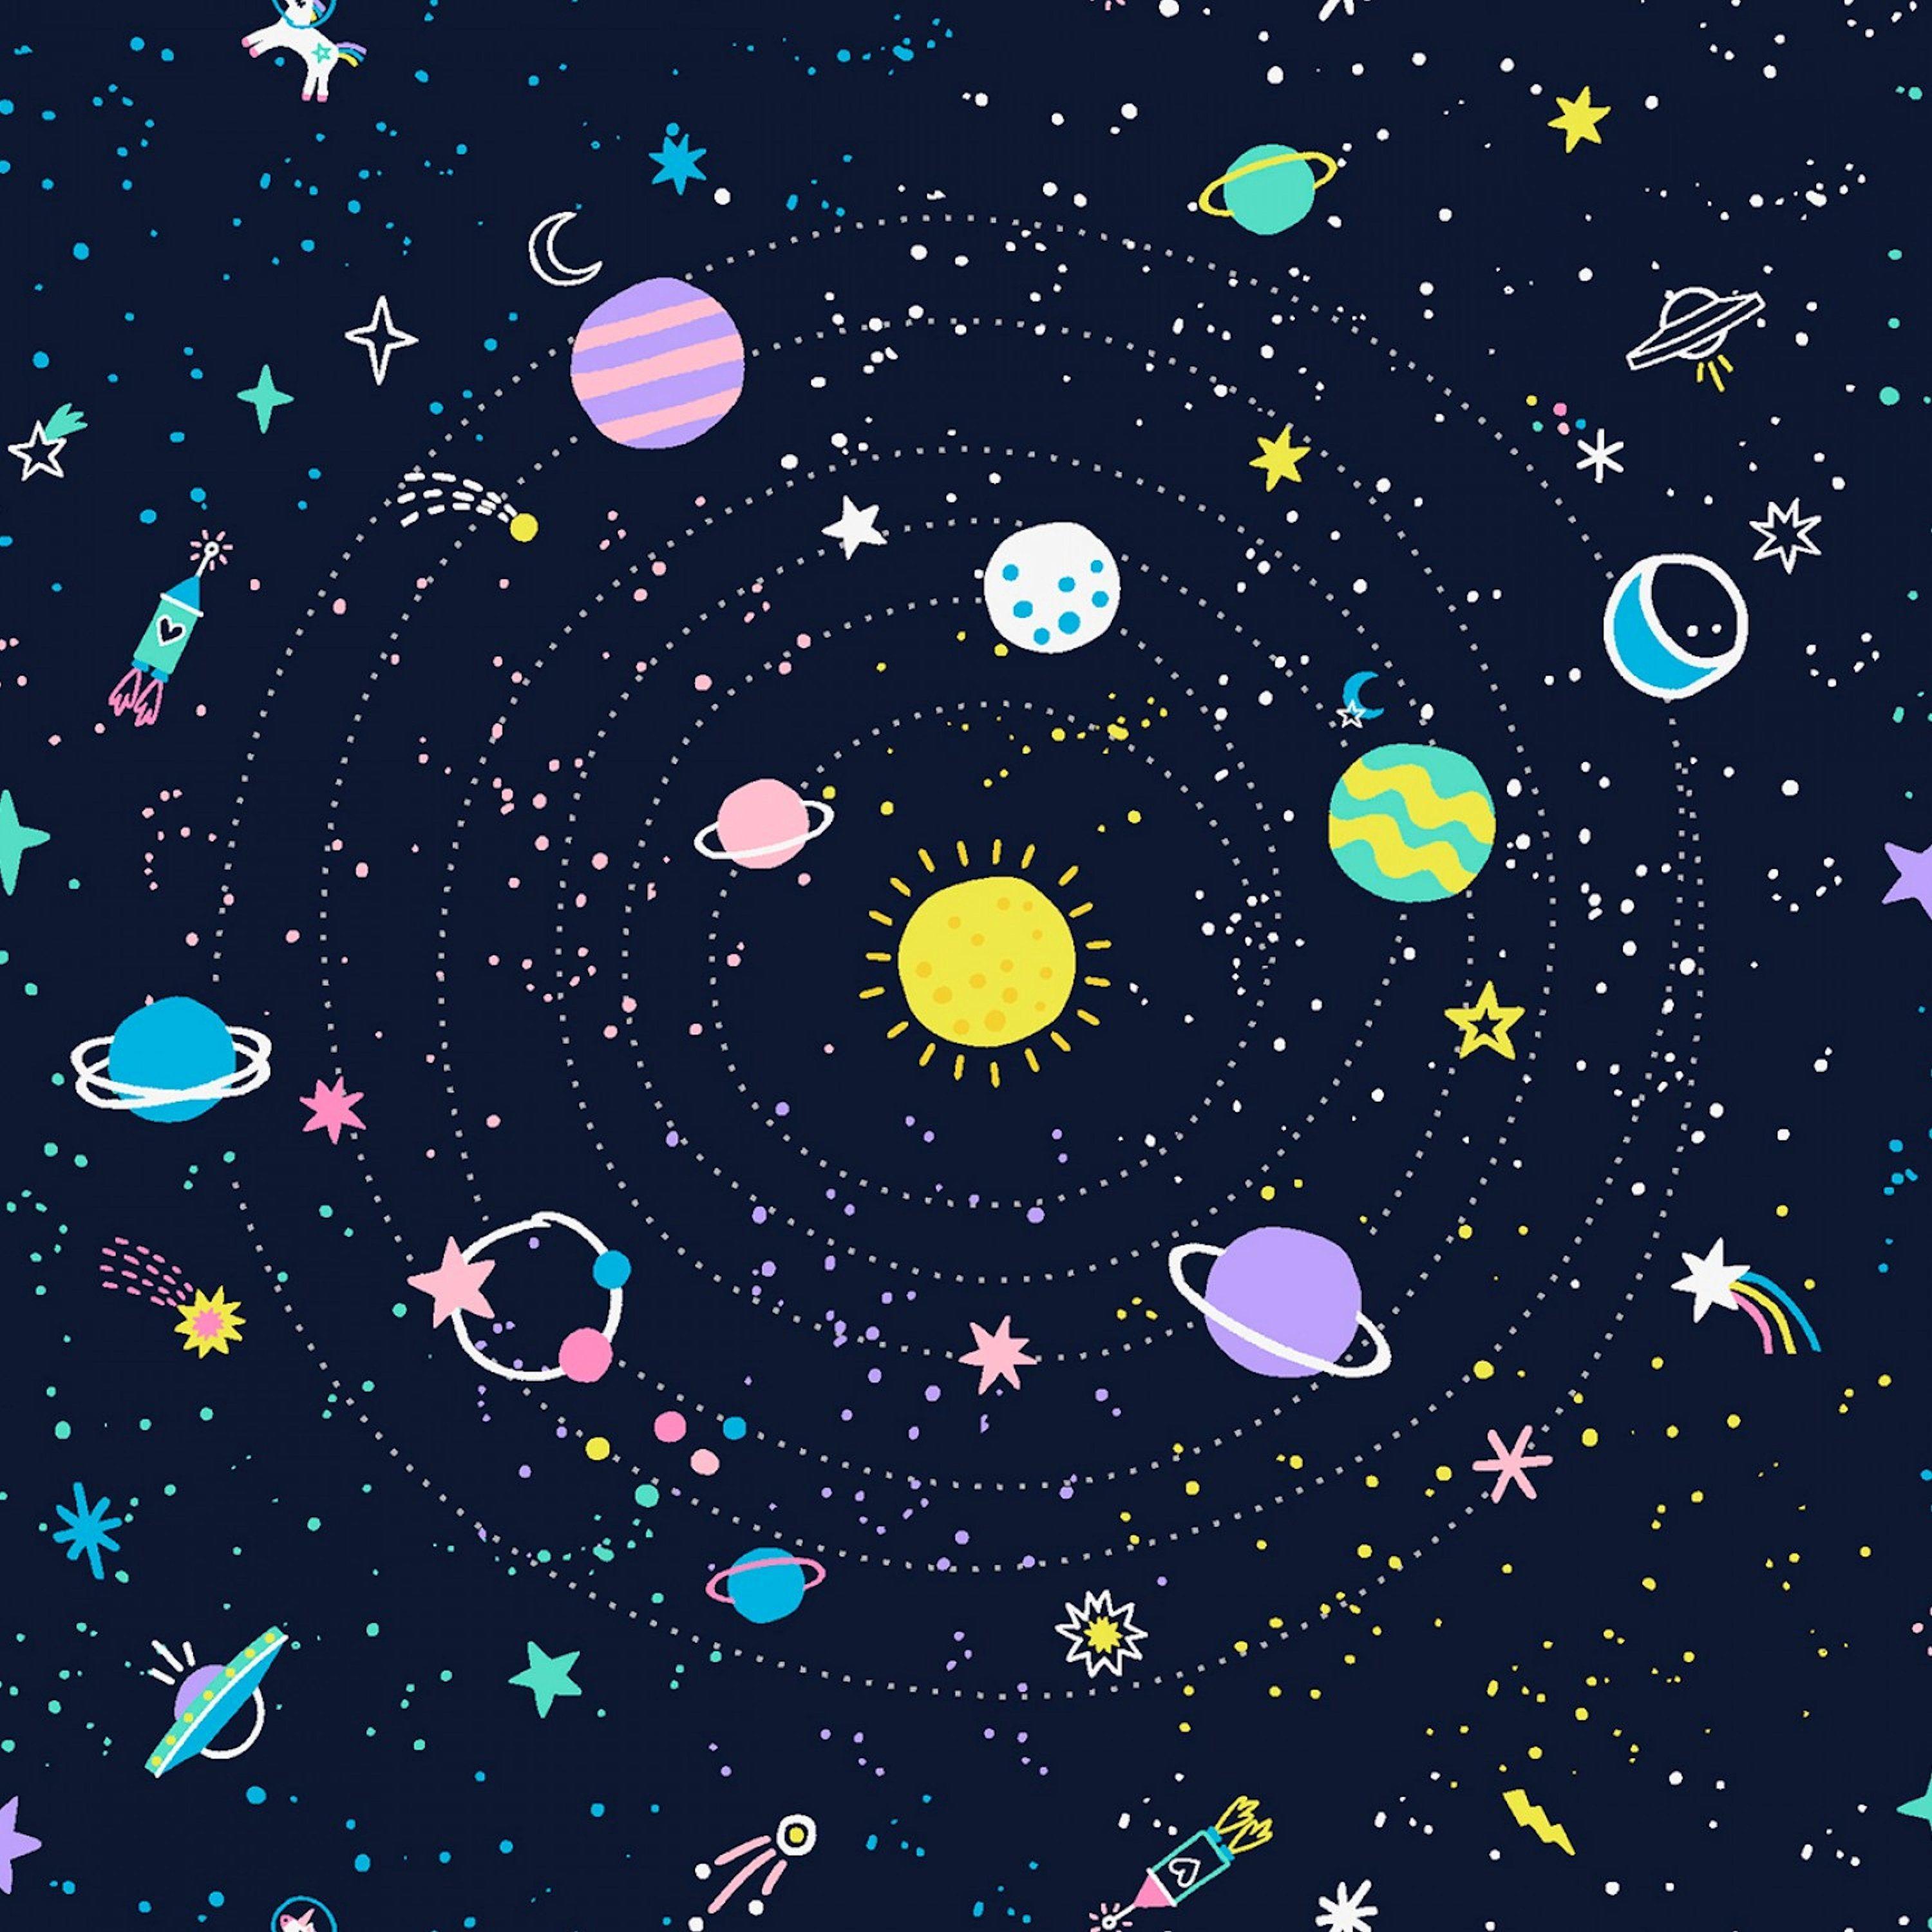 Space Illustration Wallpapers - Top Free Space Illustration Backgrounds